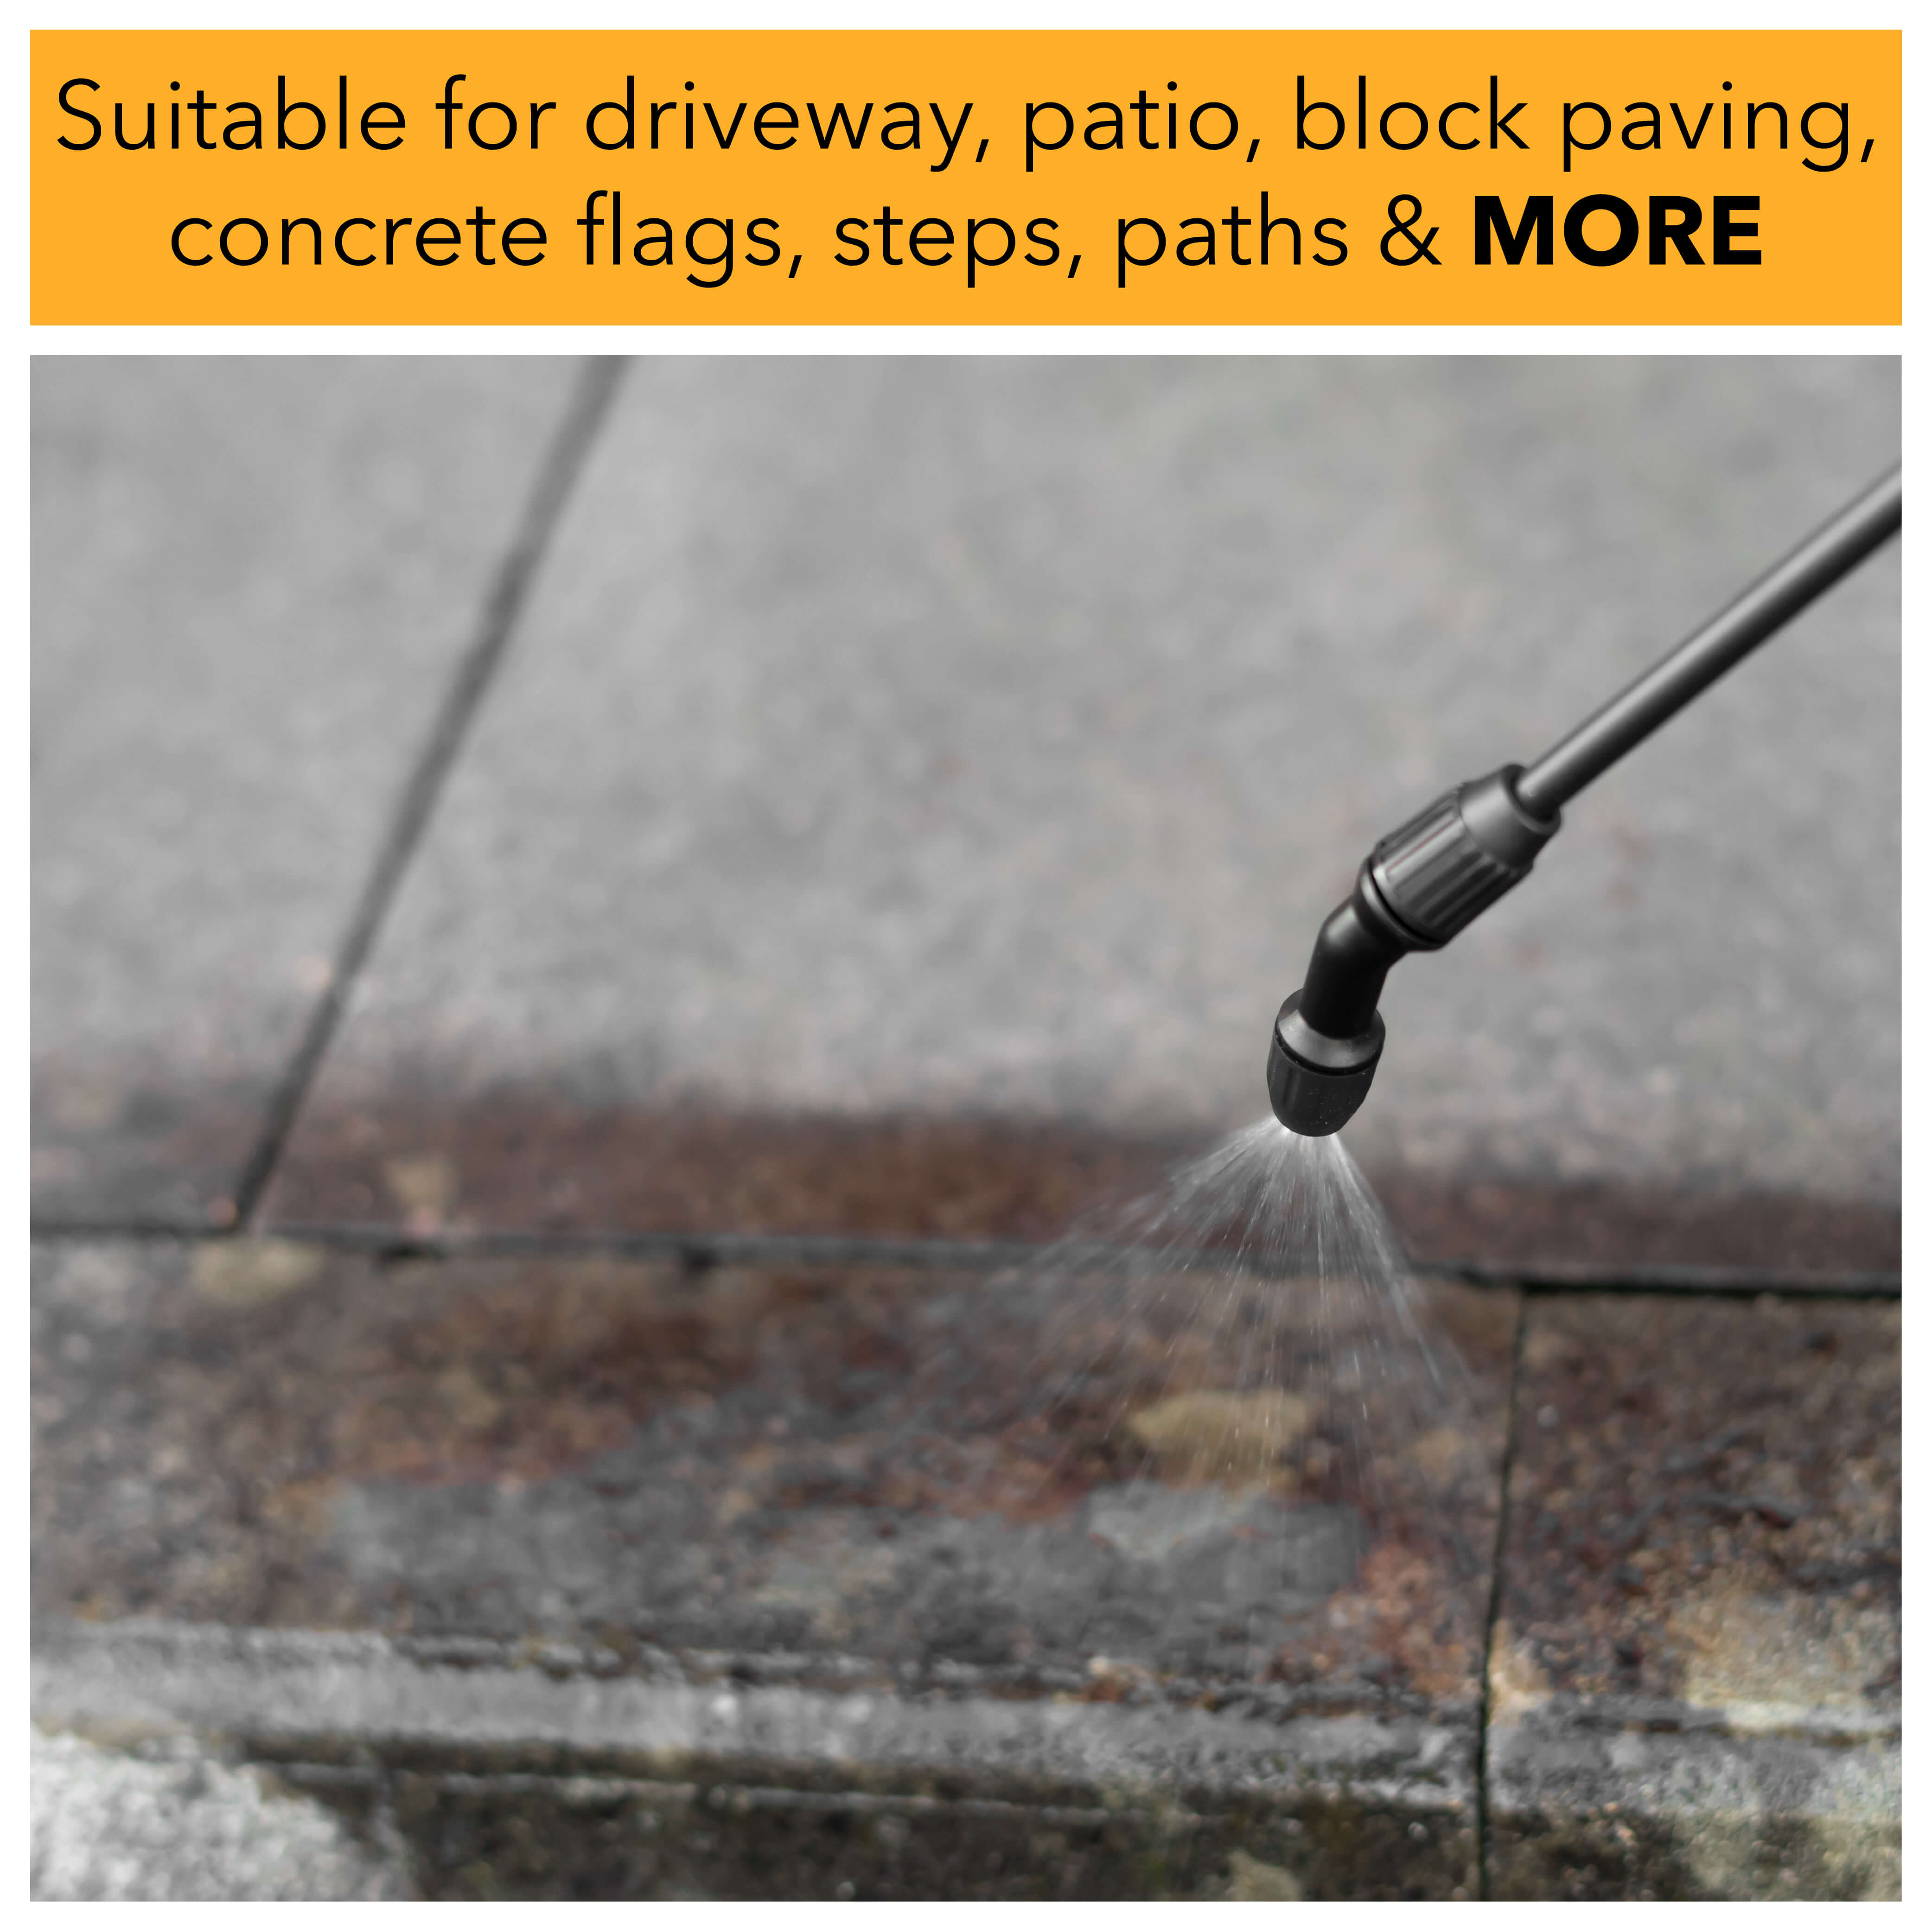 Suitable for driveway, patio, block paving, concrete flags, steps, paths and more